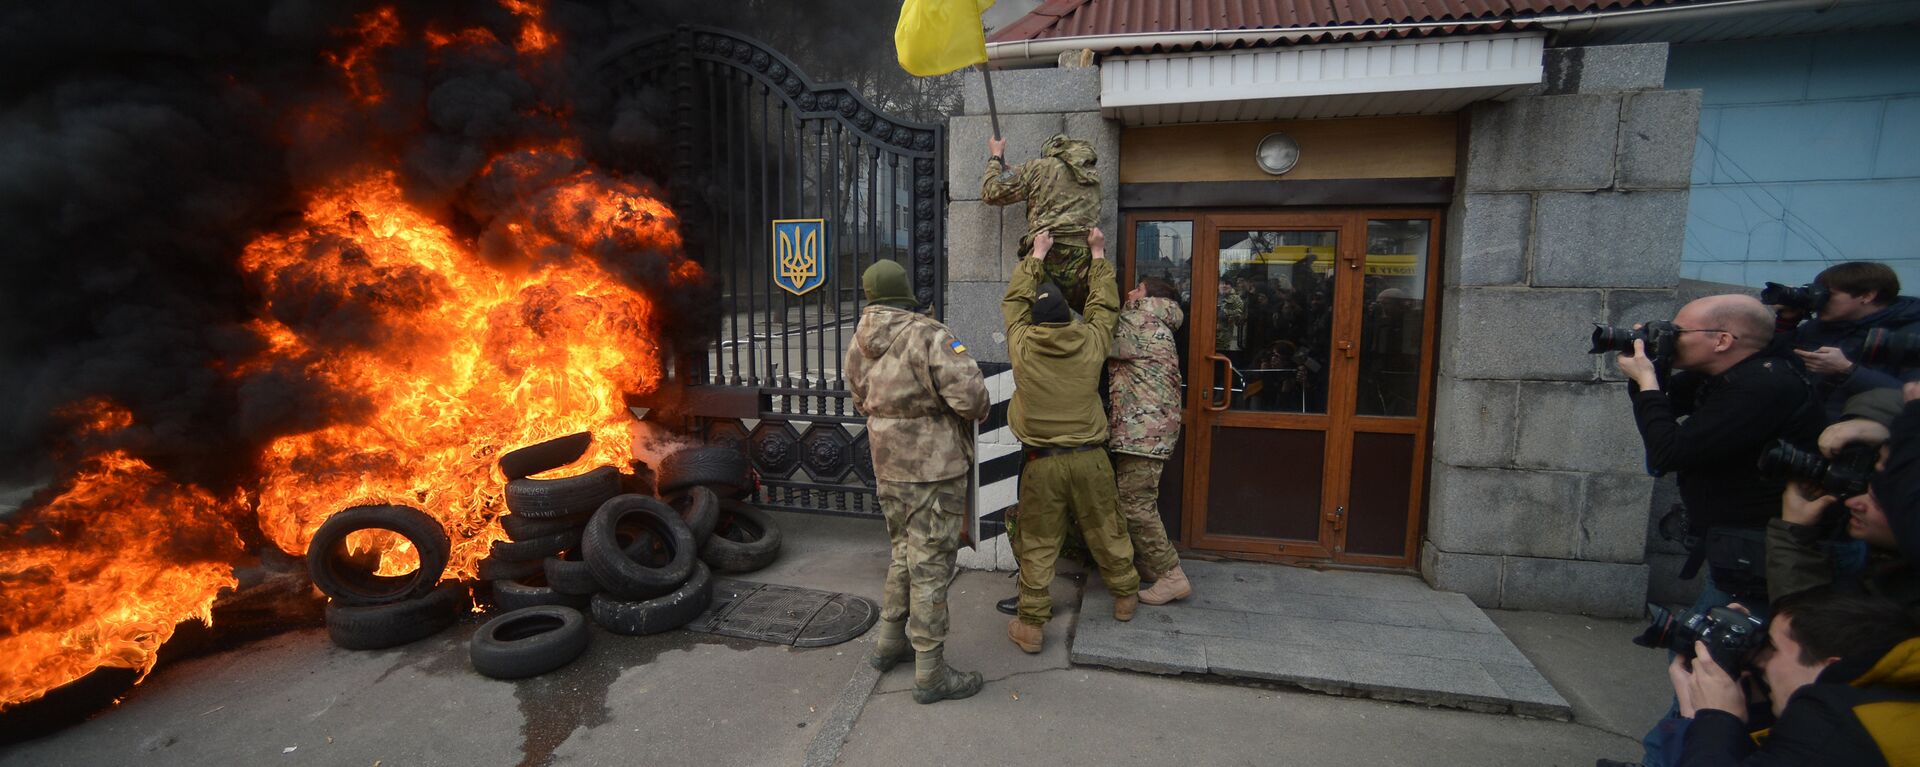 Fighters of Aidar Battalion try to storm the gate of the building of the Ukraine Ministry of Defence in Kiev during their protest action - Sputnik International, 1920, 27.12.2015